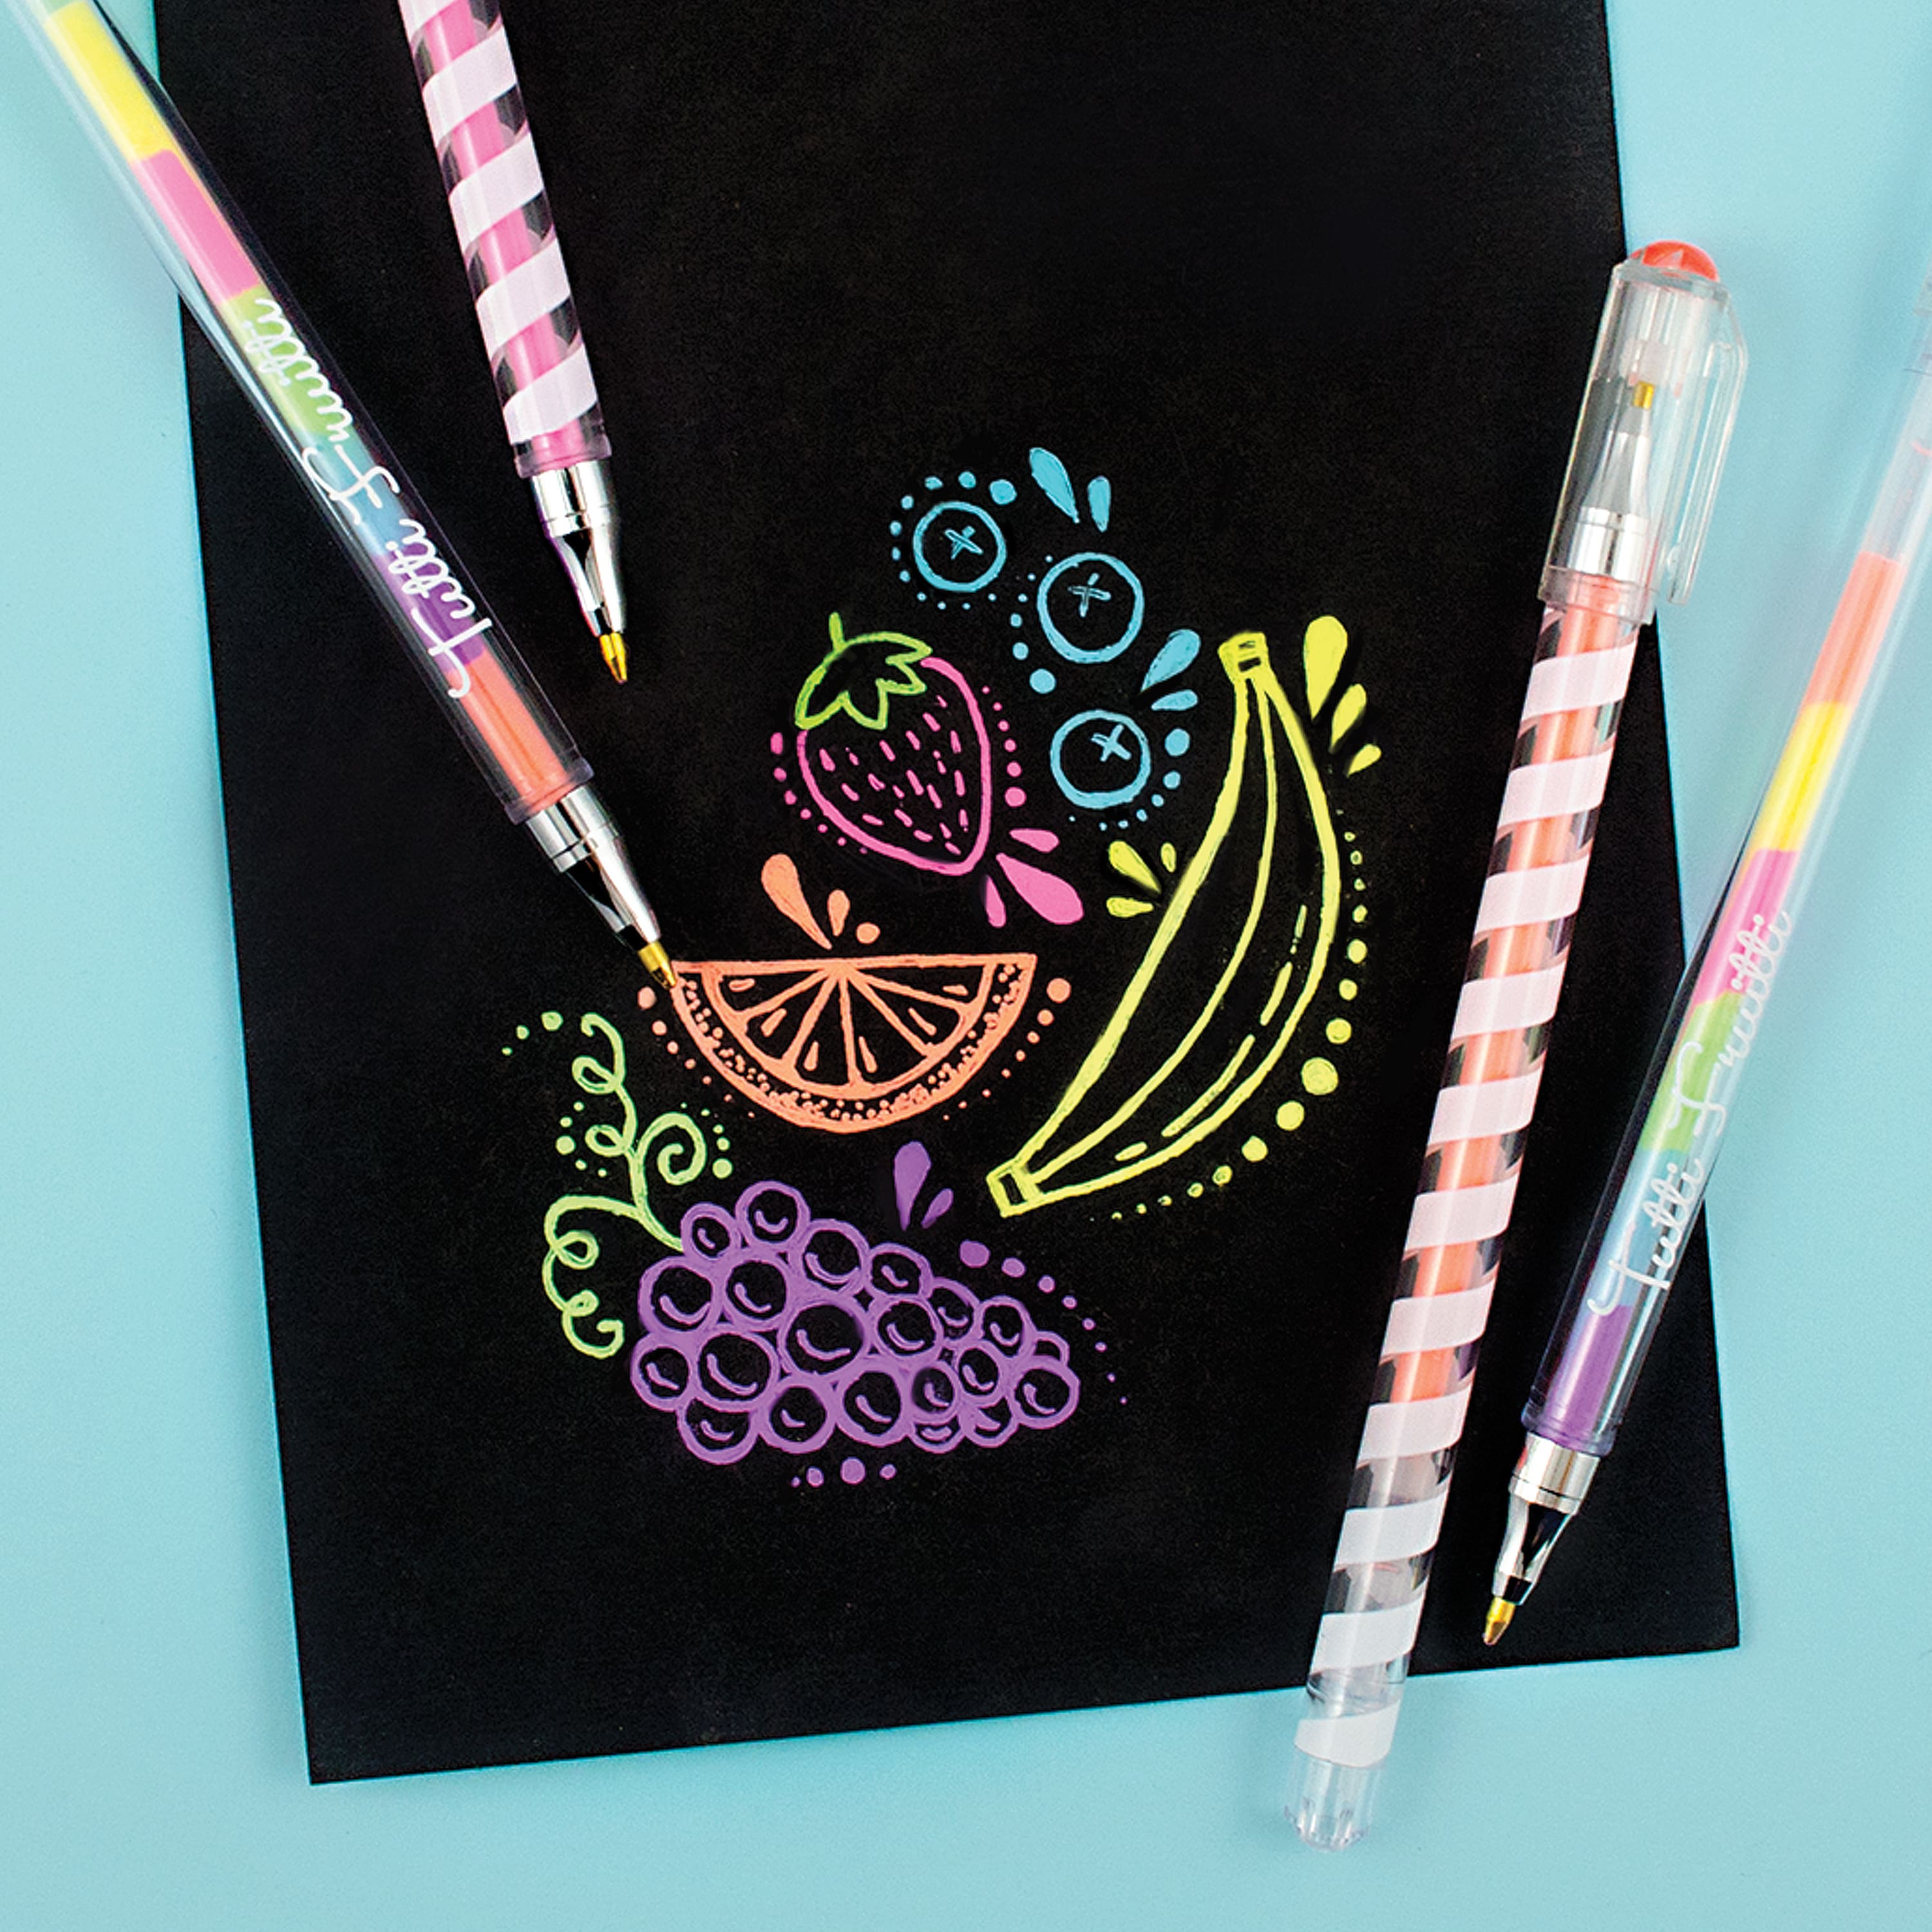 Tutti Fruitti Scented Gel Pens - OOLY